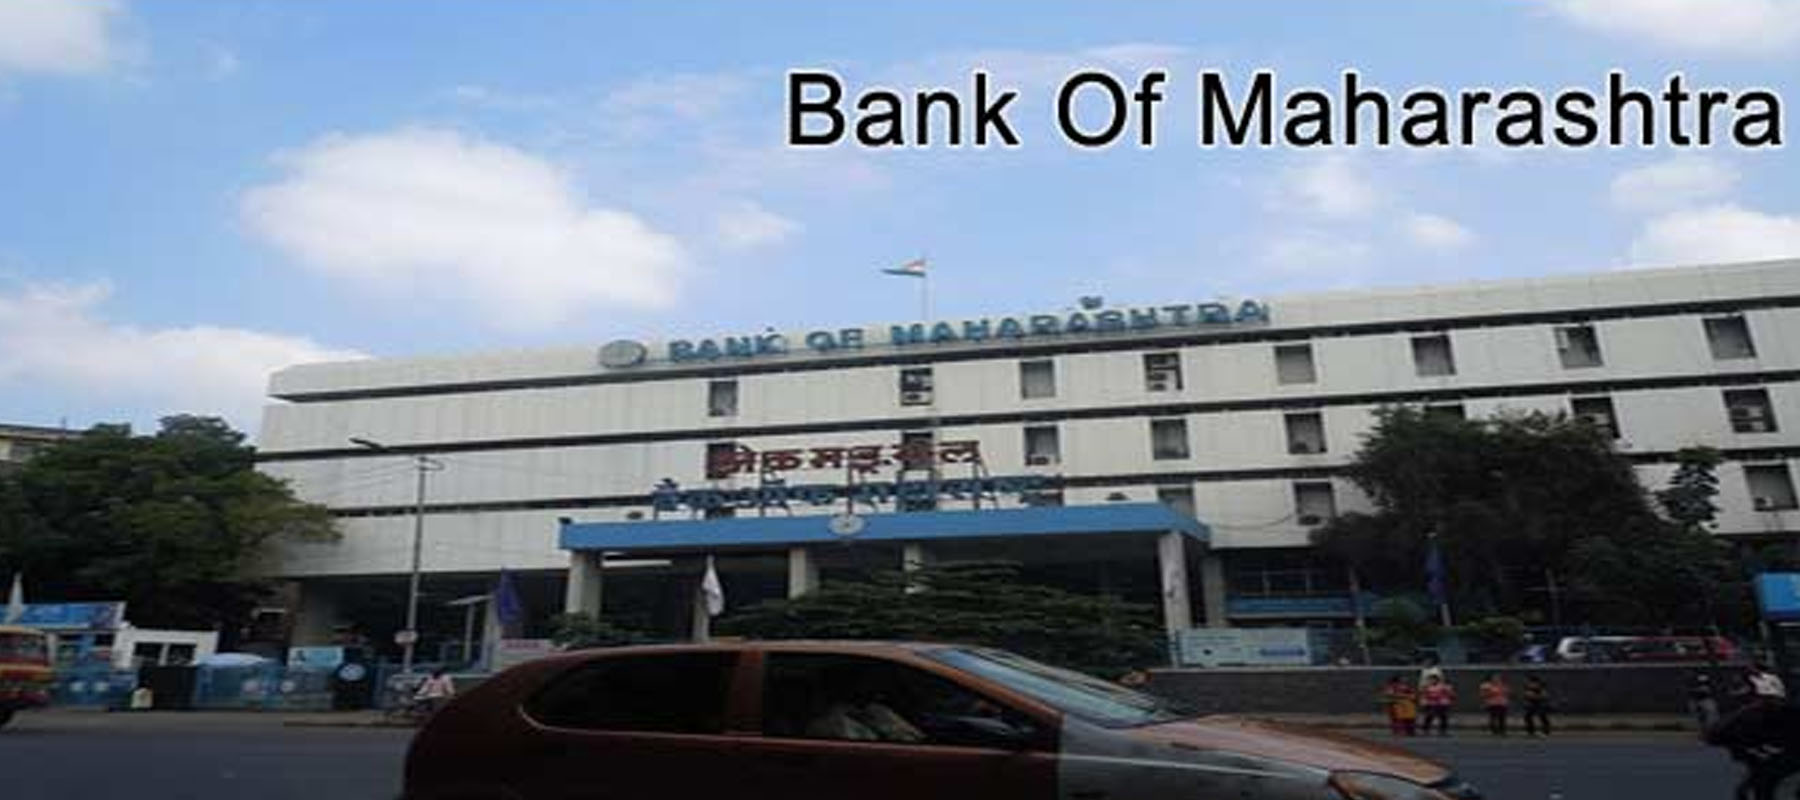 About Bank Of Maharastra